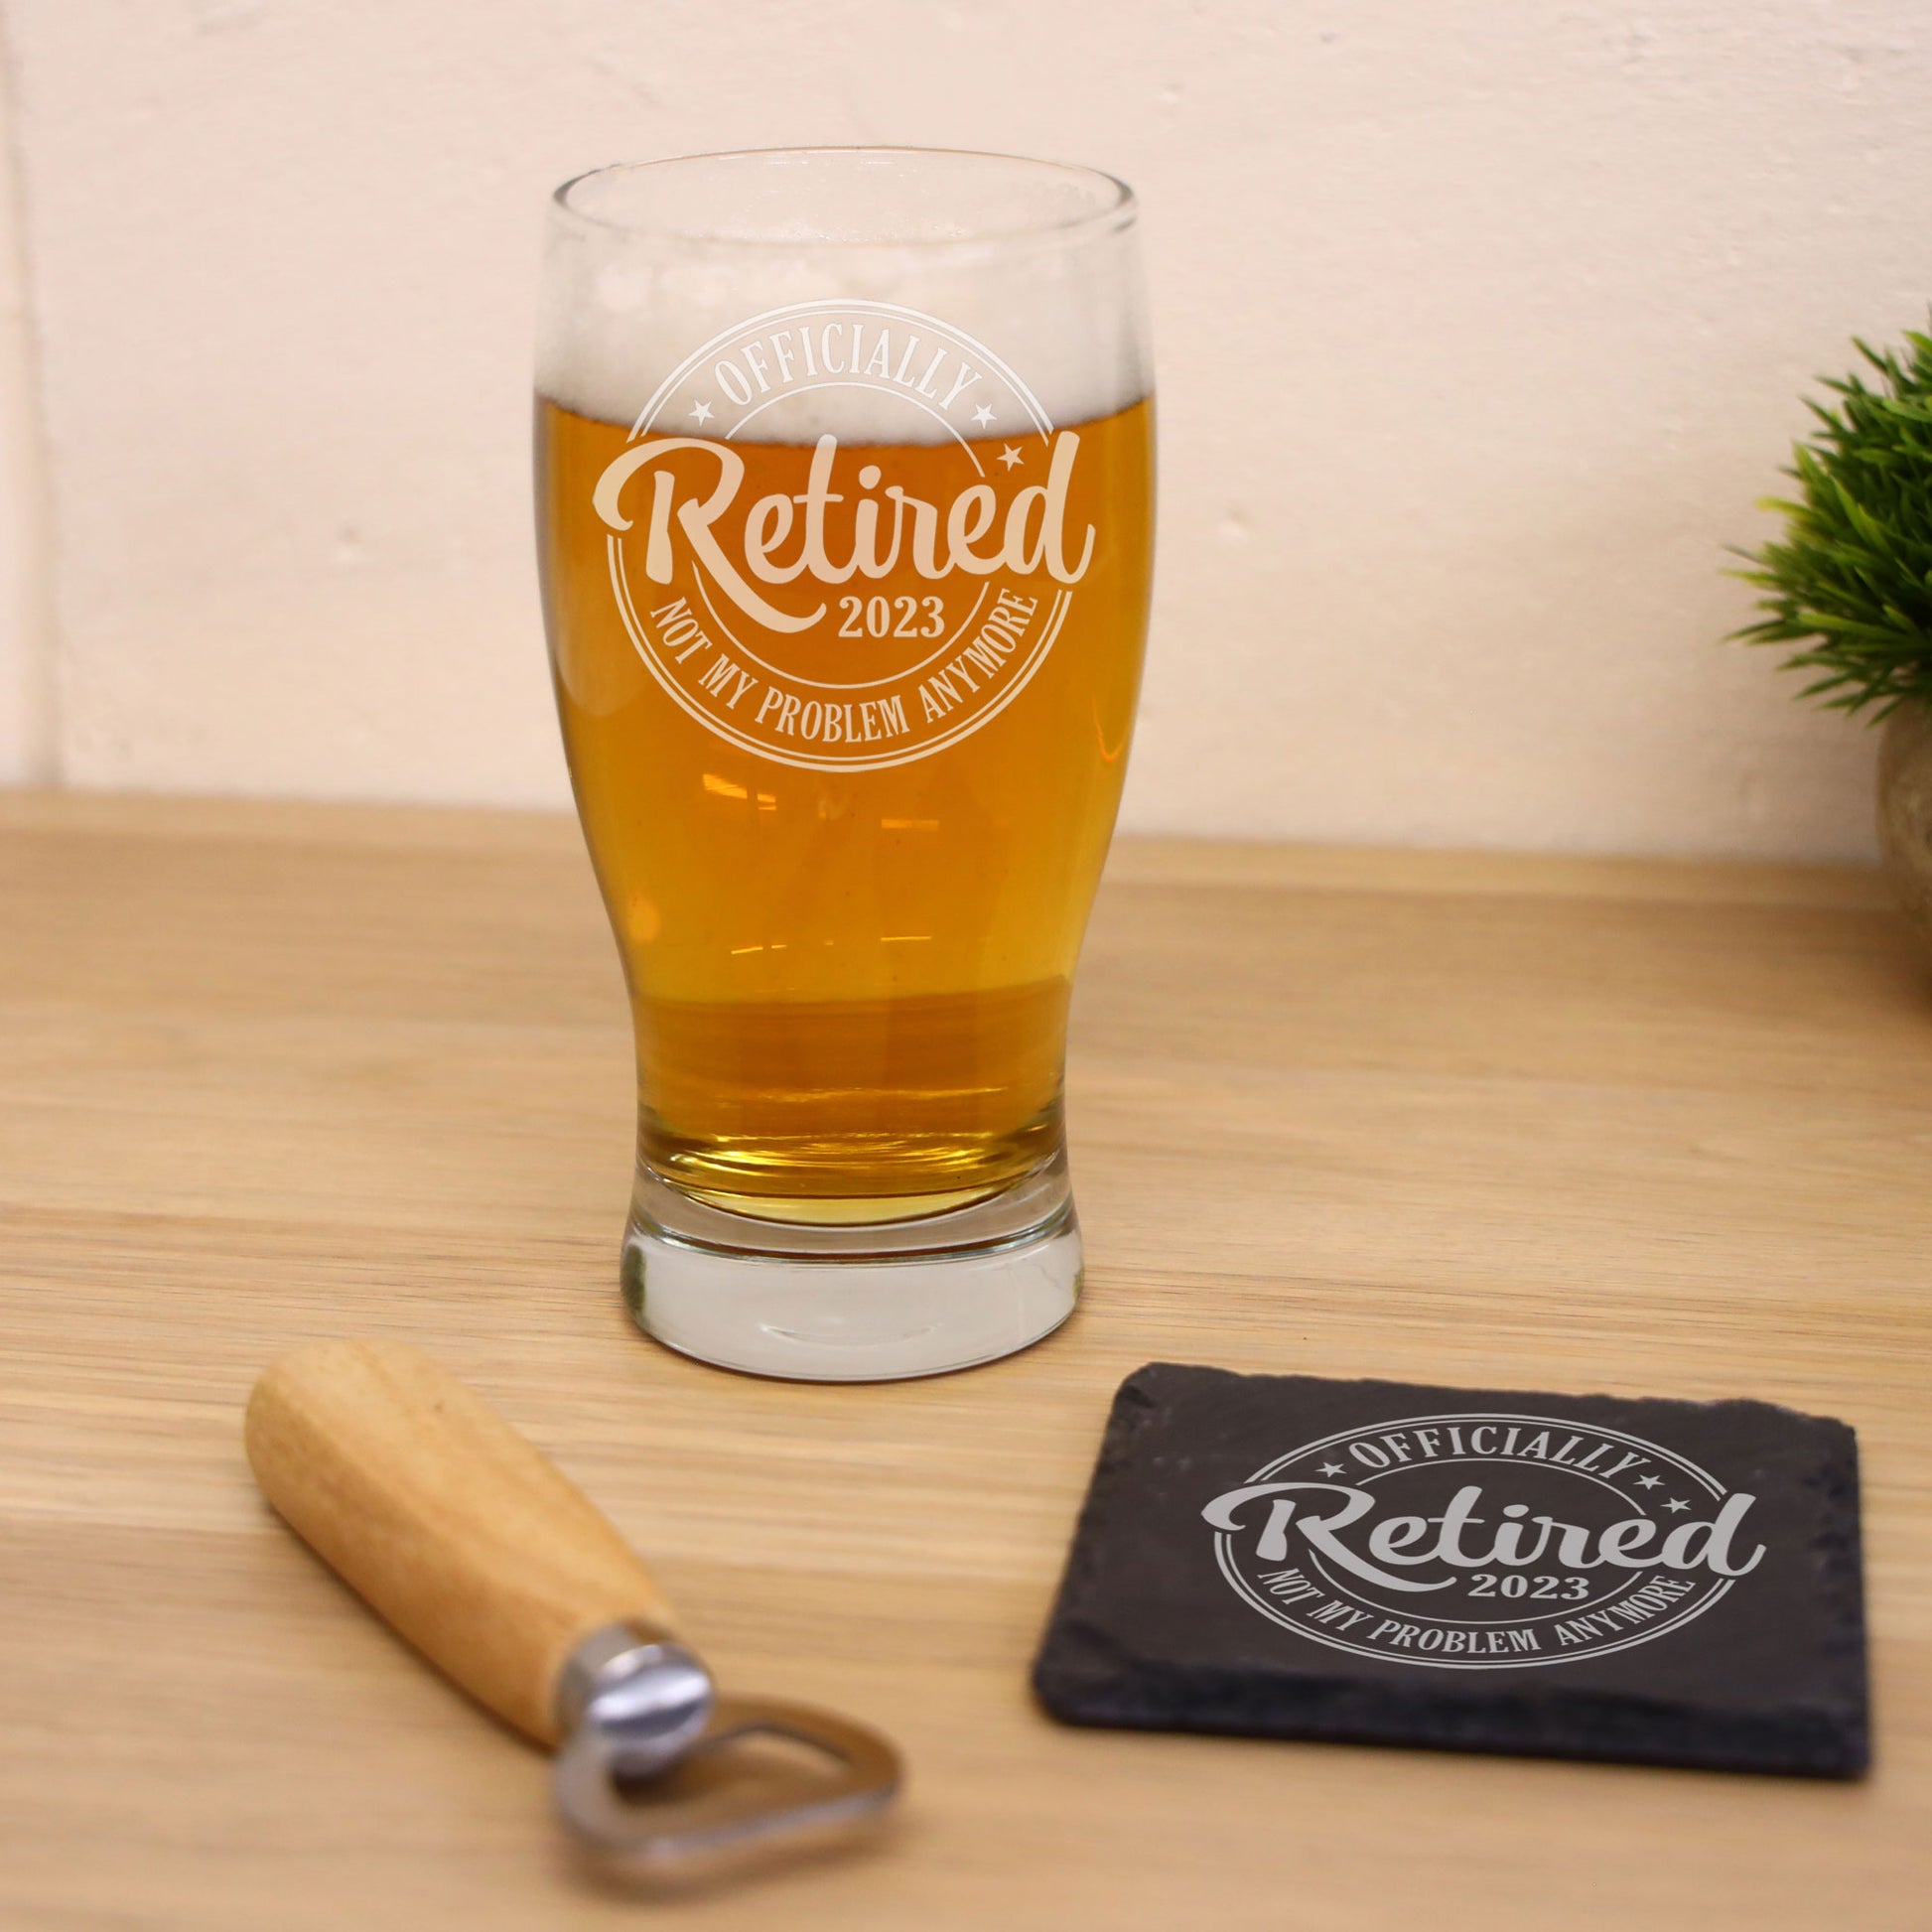 Officially Retired Engraved Beer Glass and/or Coaster Set  - Always Looking Good - Glass & Square Coaster Set  